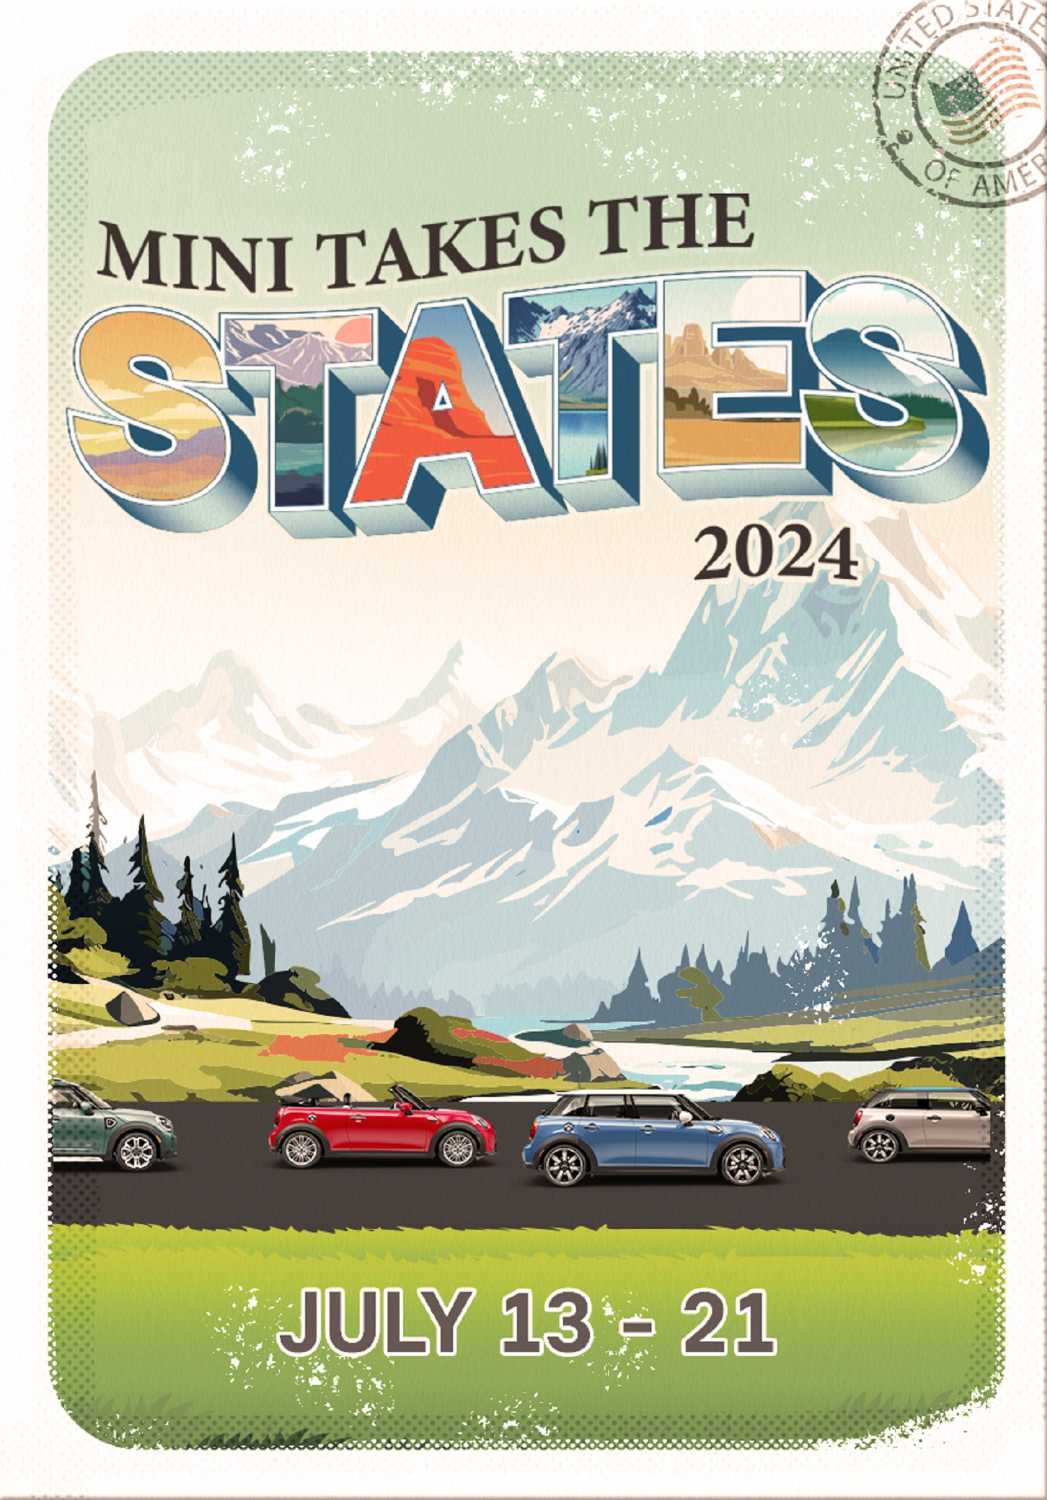 MINI USA Confirms MINI Takes the States 2024, Announcing Official route